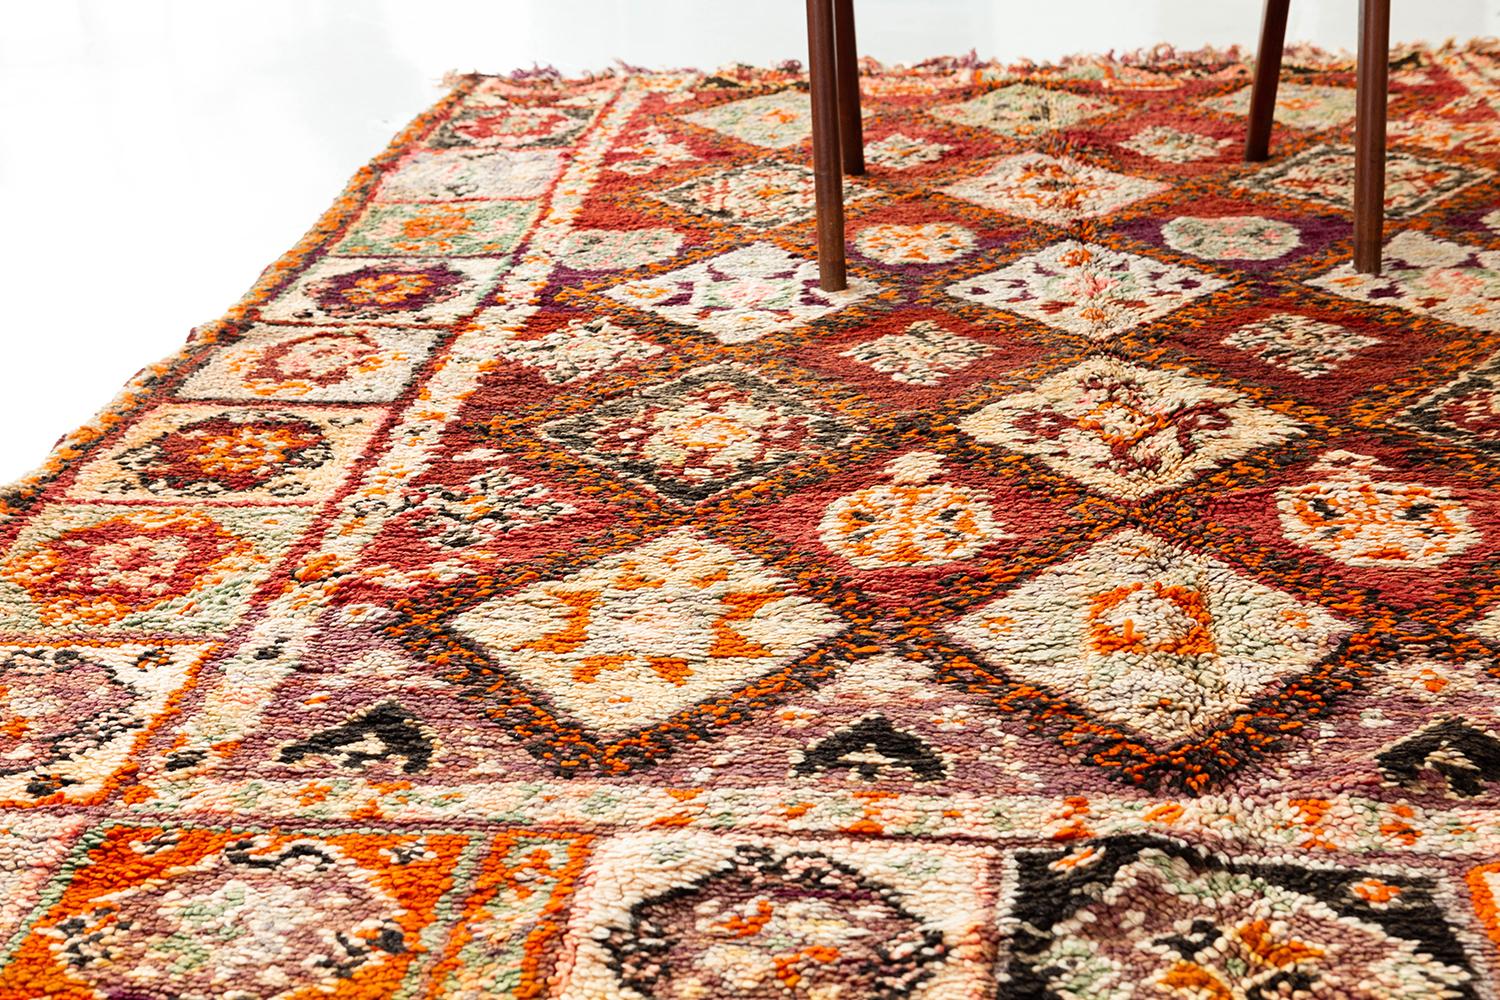 A beautiful vintage Moroccan rug from the High Atlas tribe of Morocco. Intricate patterns and symbolism is handwoven into a one of a kind ethnic art piece. This rug will bring a tasteful essence to any space.